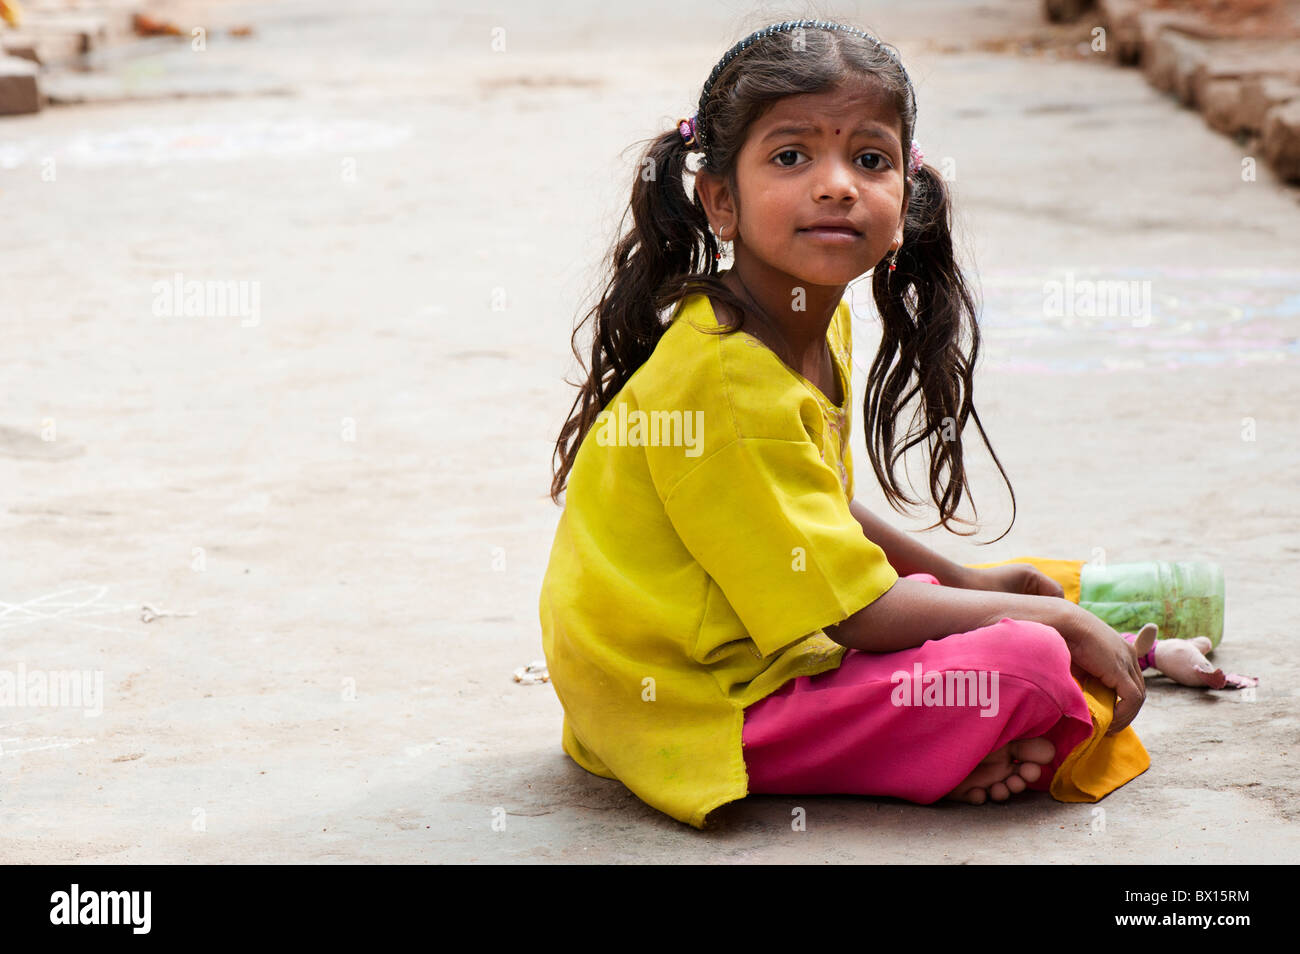 Smiling happy Indian village girl with a soft toy sitting in the street. Kothacheruvu, Andhra Pradesh, India Stock Photo